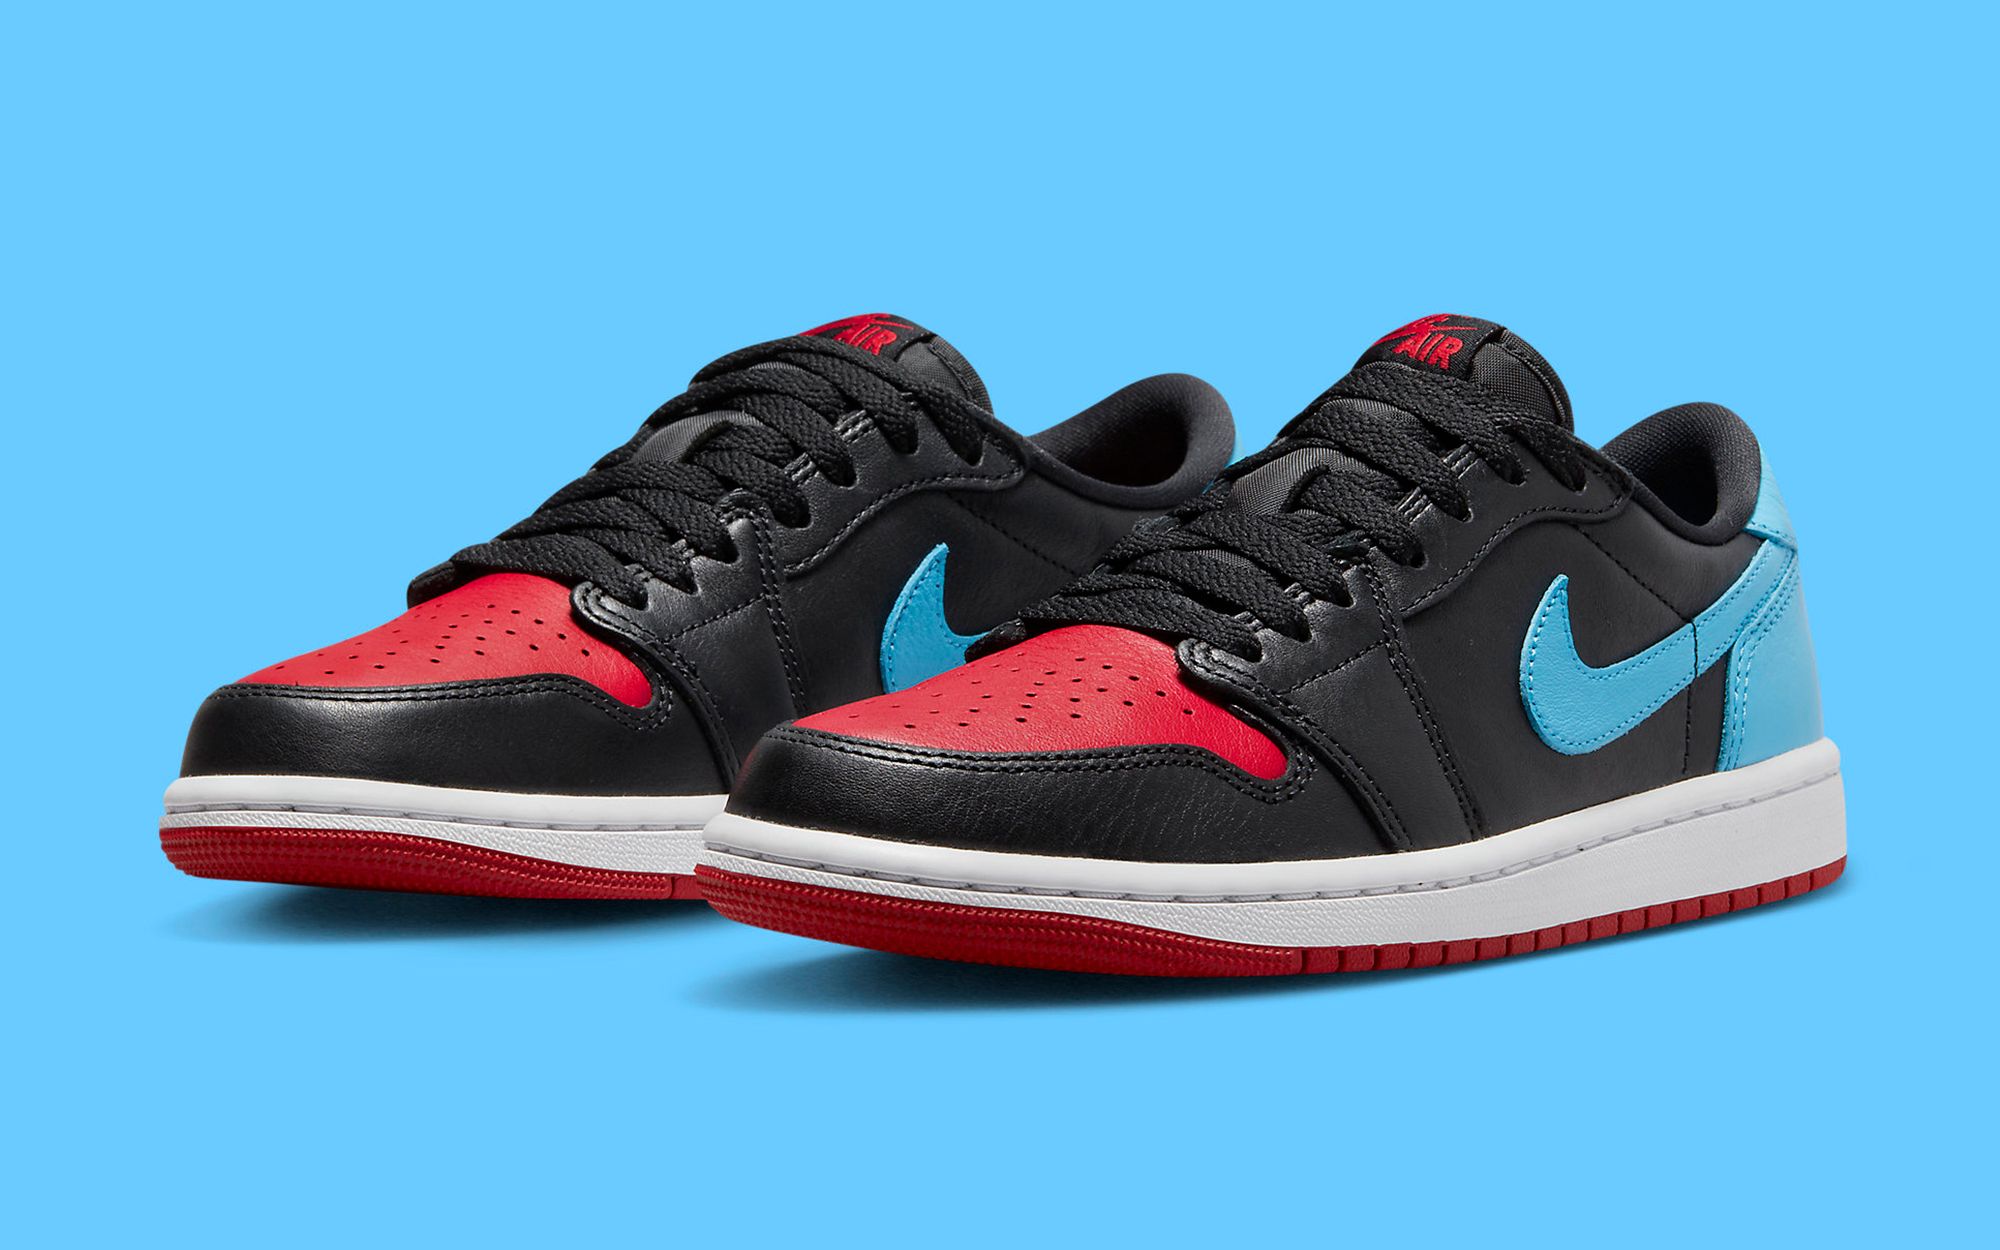 Where to Buy the Air Jordan 1 Low OG “UNC to Chicago